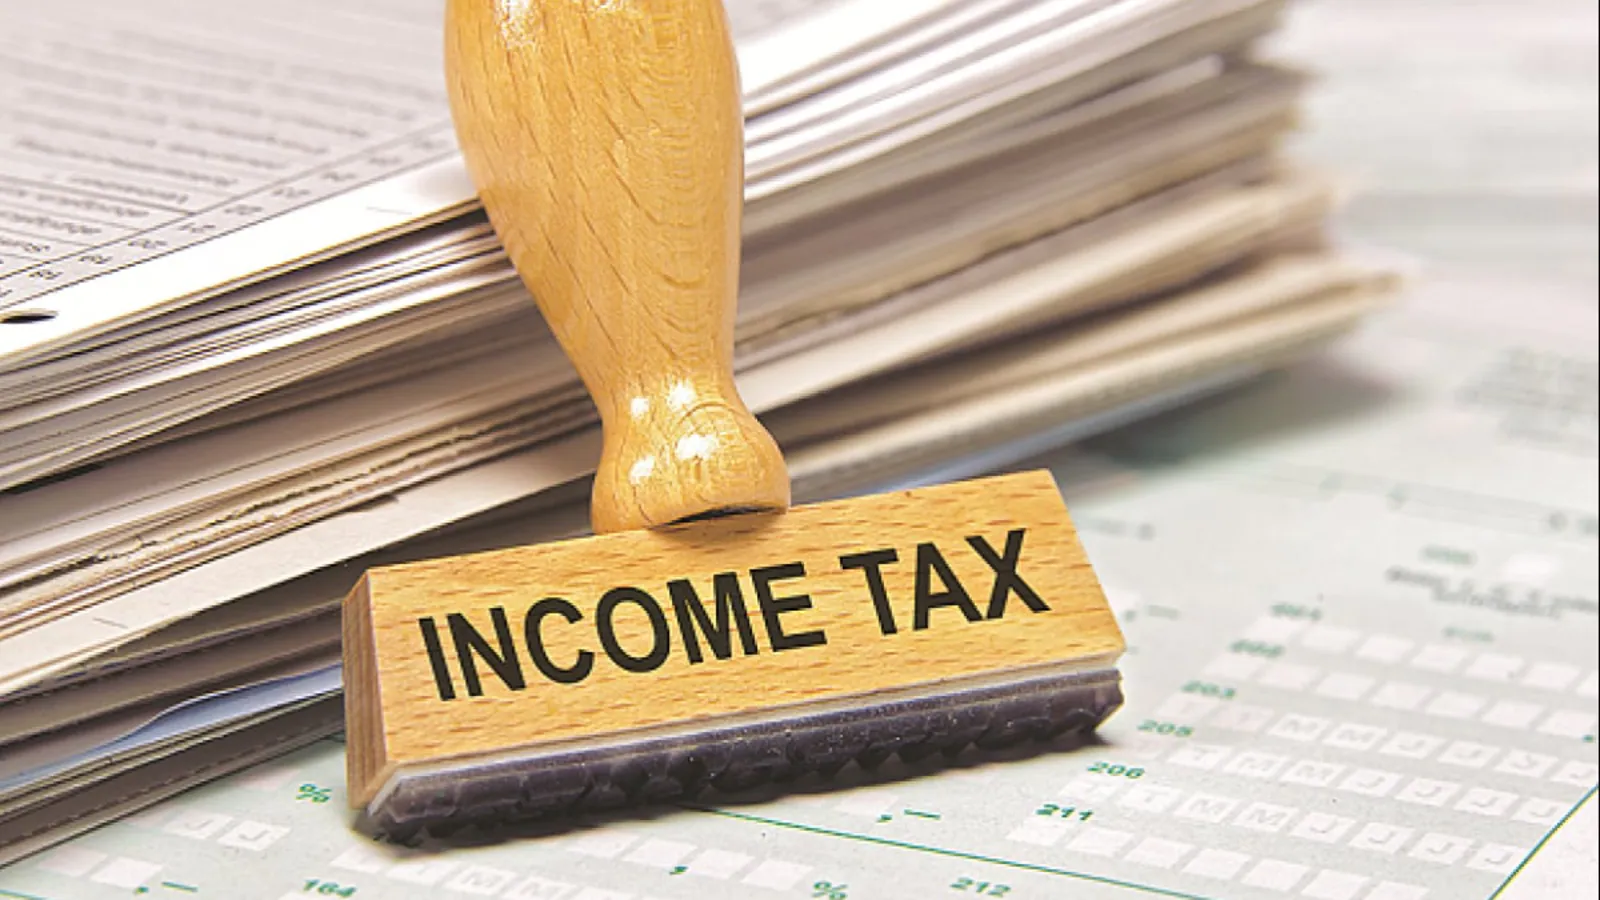 How to file income tax return: Step-by-step guide, documents needed